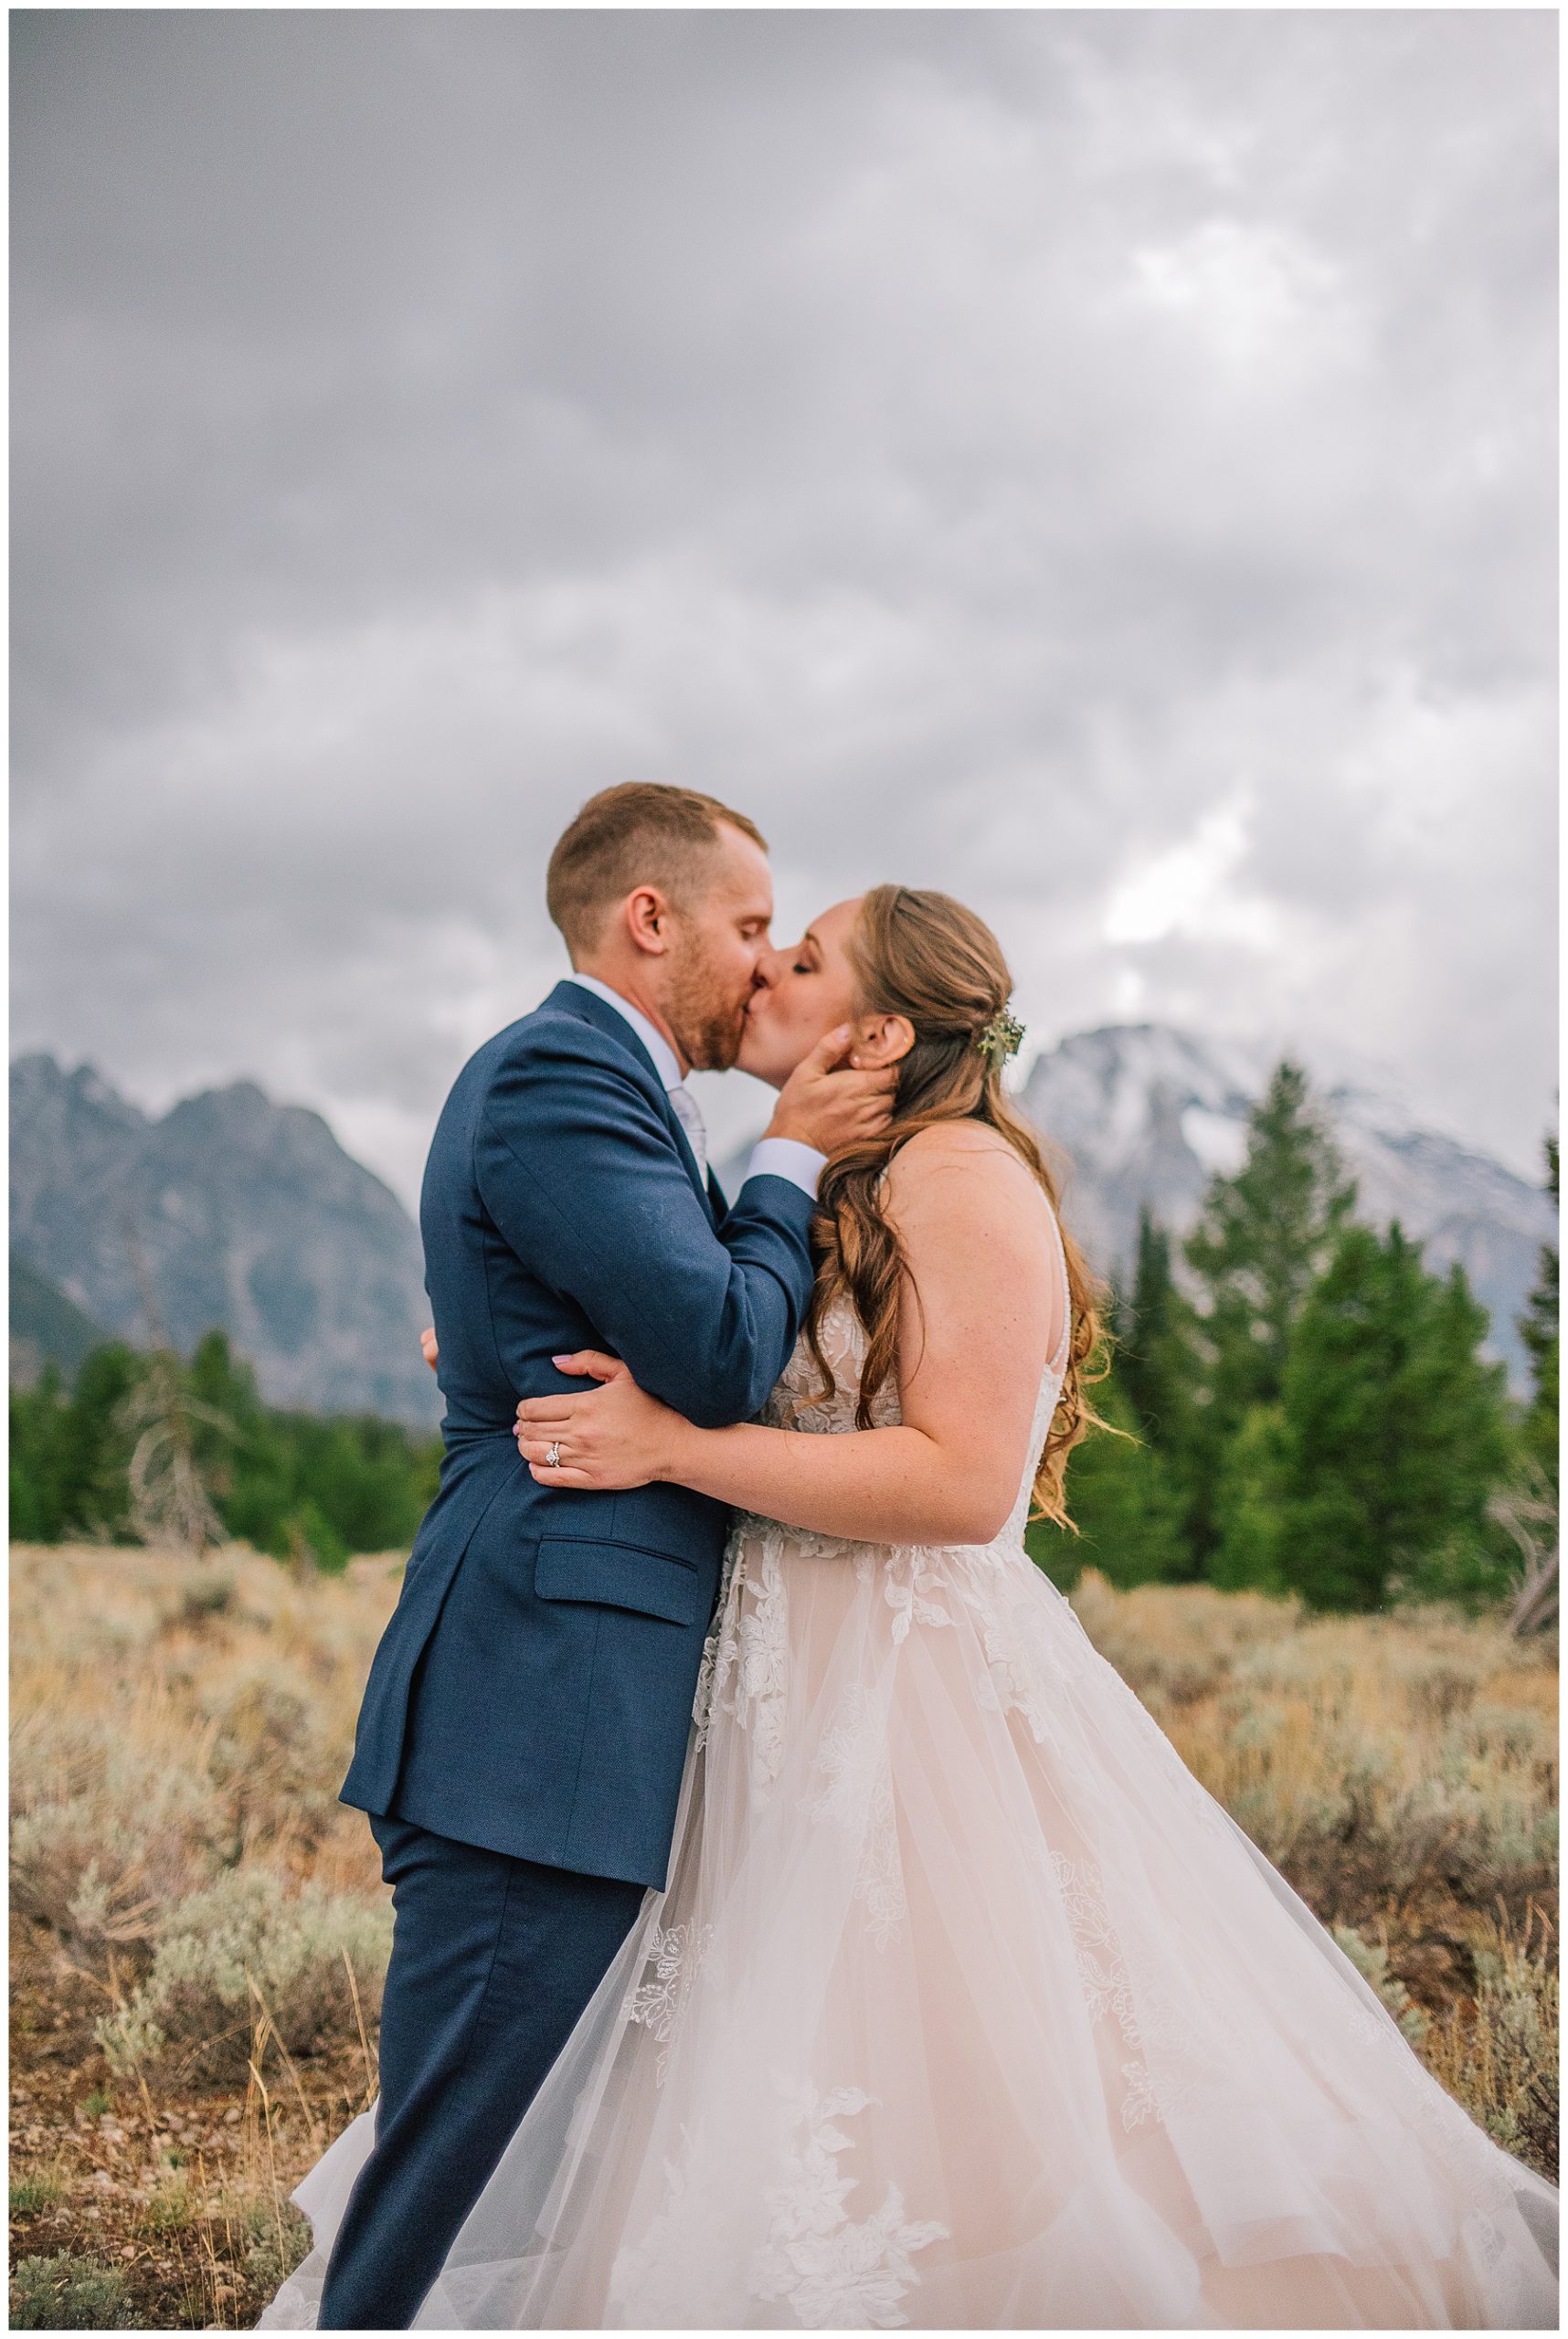 national park wedding with bride and groom kissing and holding each other in front of a mountain range on a cloudy day